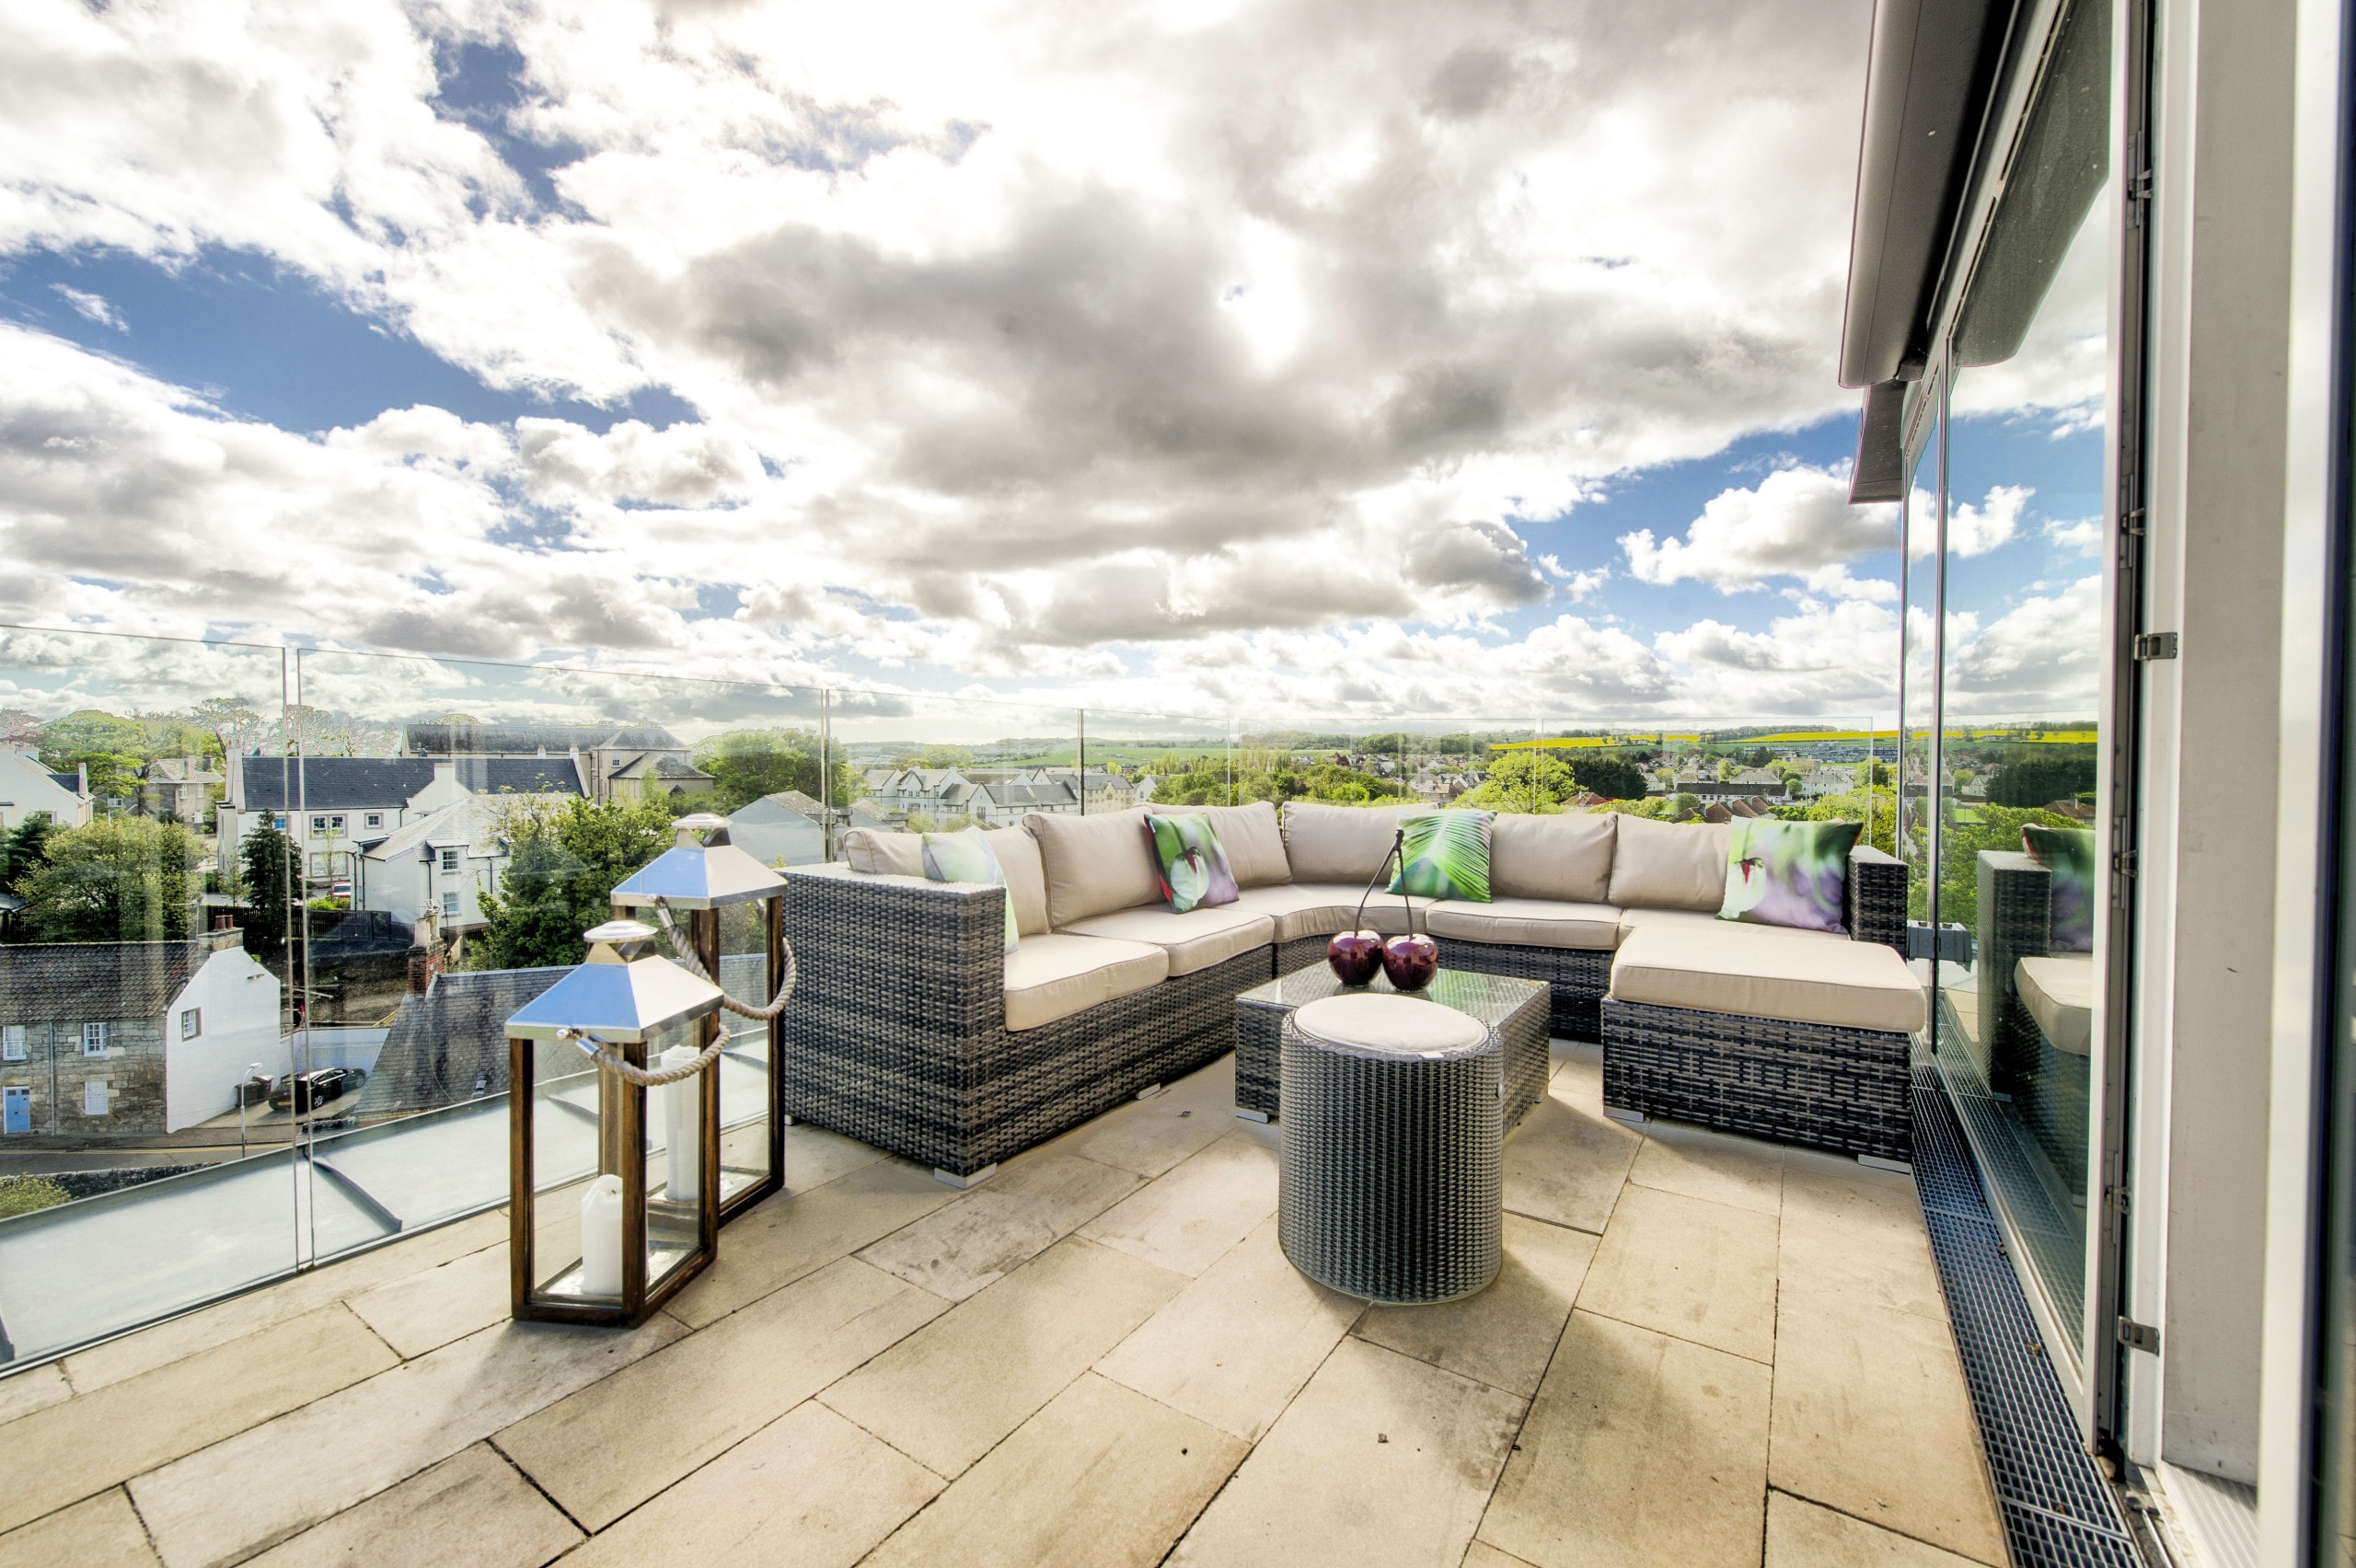 Property Image 2 - Penthouse with terrace and putting green, near to Old Course